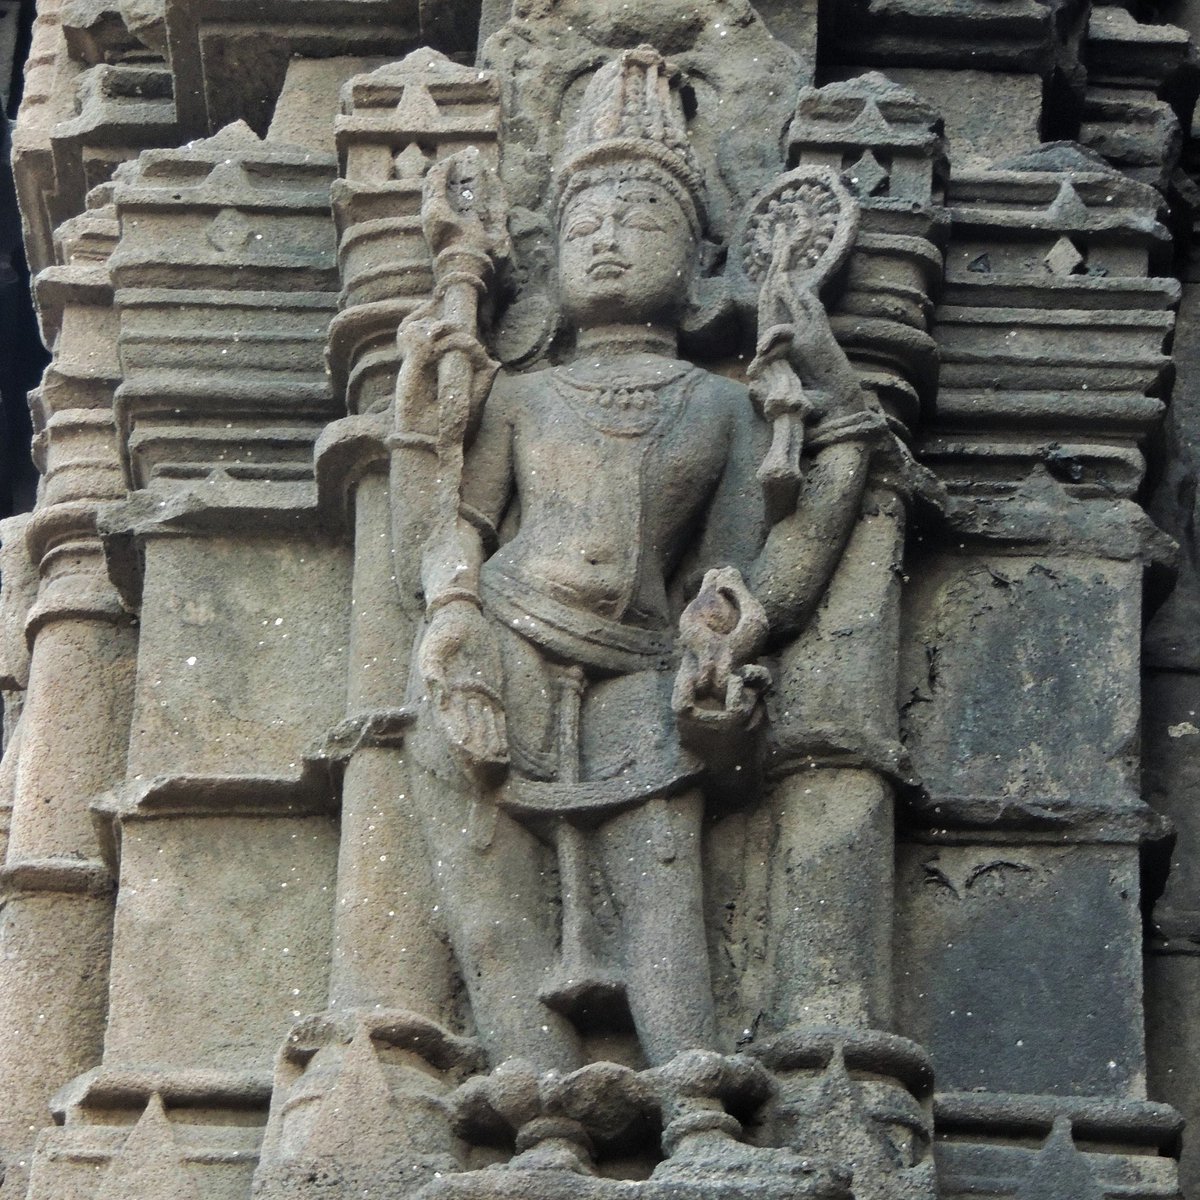 अं for अंबरनाथ शिवालय / Ambernath Shiva Temple. Harihara. Note the jata on one side, kirita on the other, the trishul, shanka and chakra in the hands, the different types of earrings, uniting Shiva and Vishnu in one sculpture.  #AksharArt  #ArtByTheLetter (7/10)